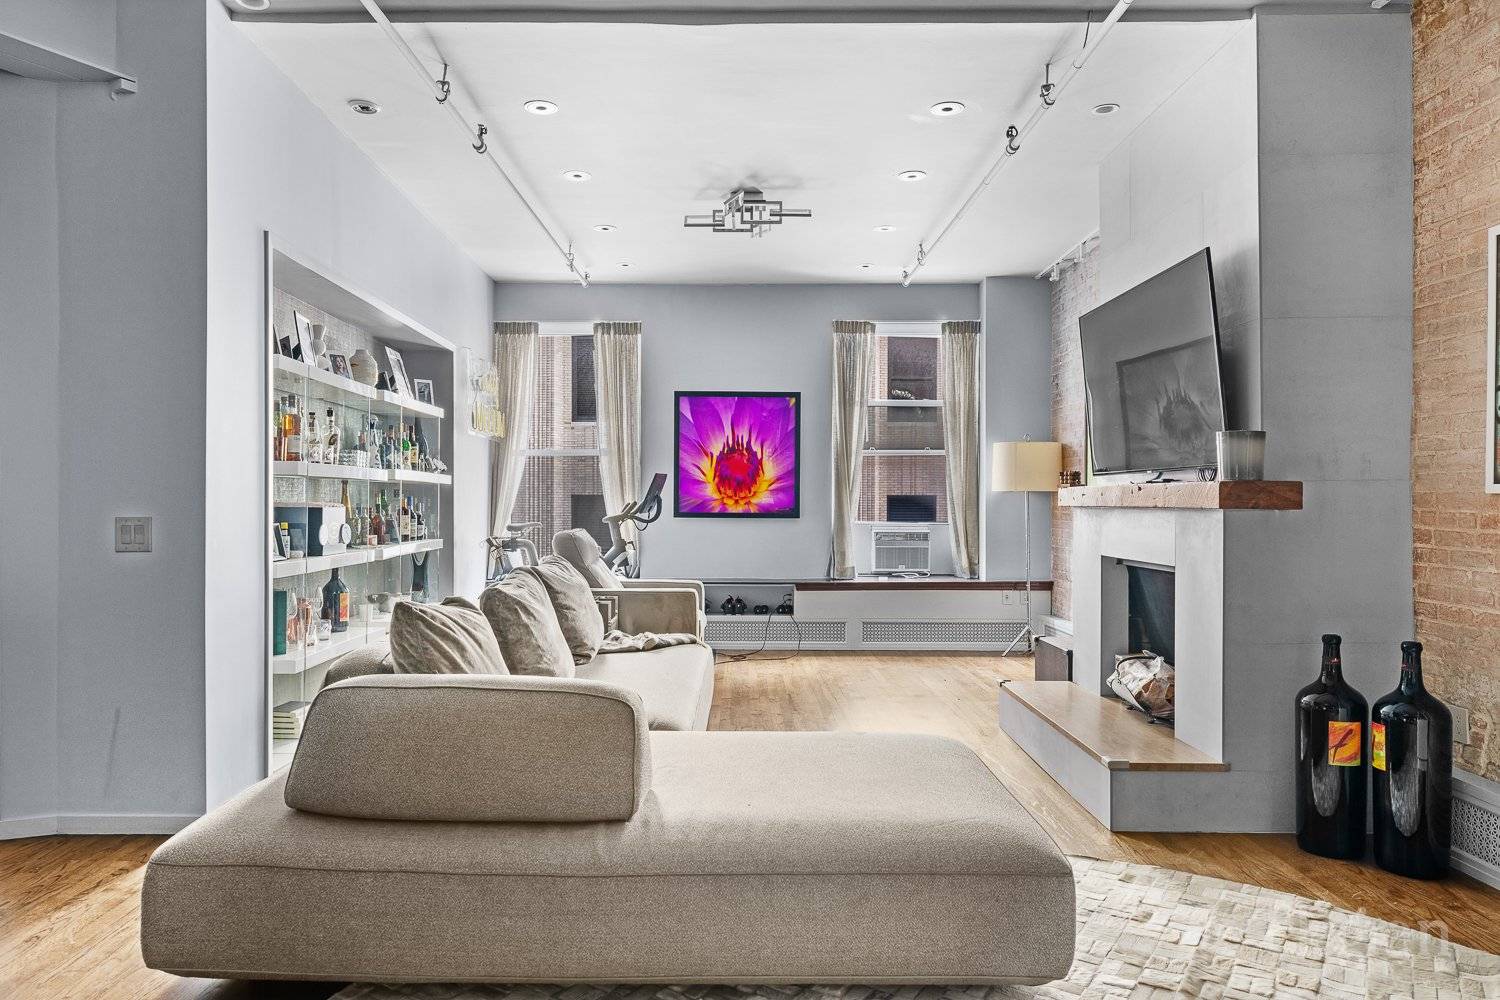 Chic Chelsea Loft Urban Retreat Experience the epitome of stylish loft living in the heart of Chelsea with this impeccable two bedroom, two bathroom gem.